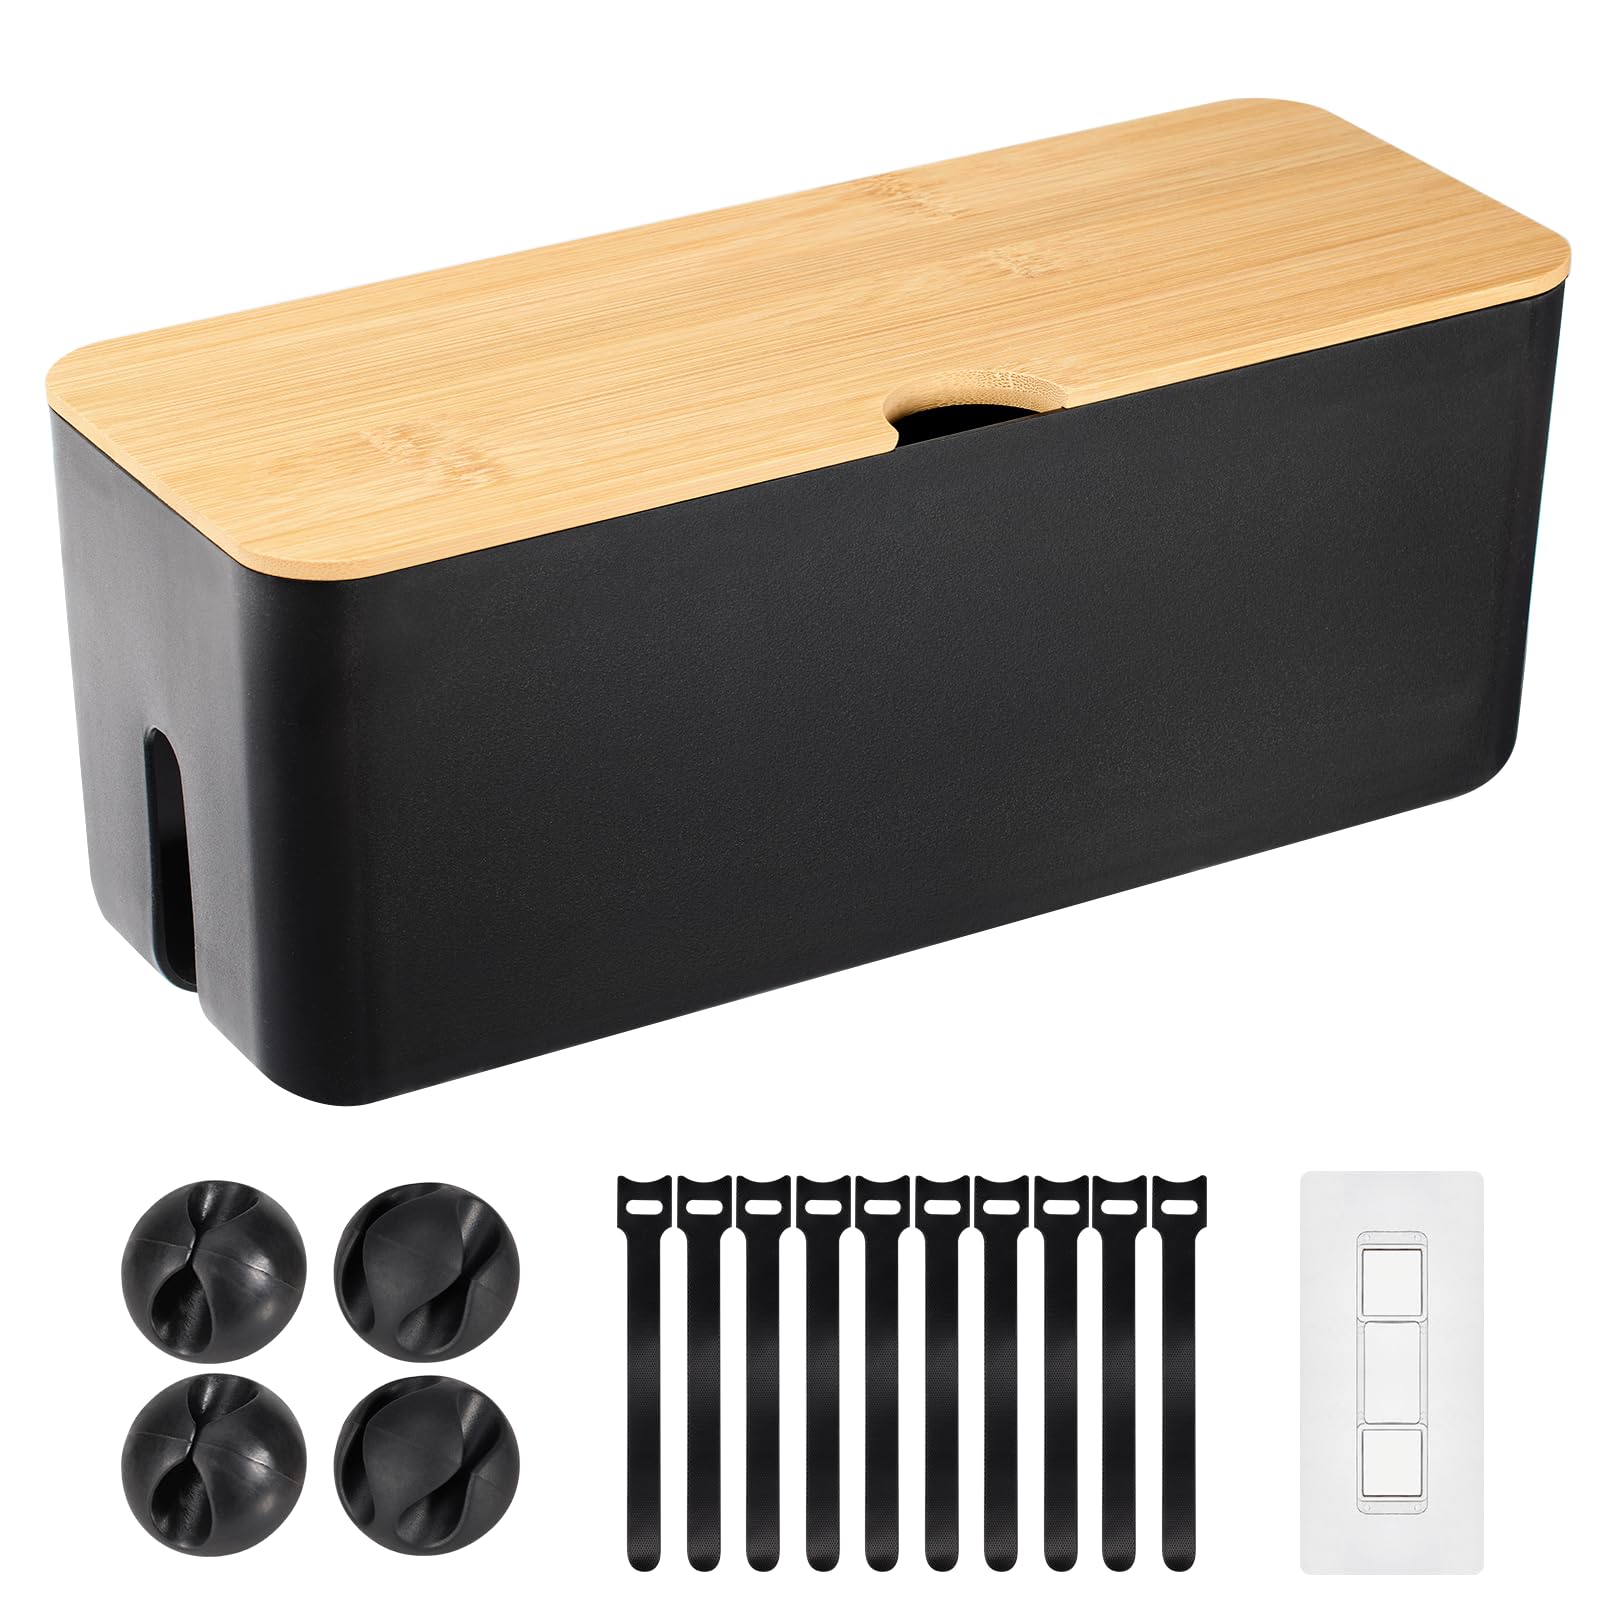 Cable Management Box - Wall Mount Wood Lid Cord Organizer Box for